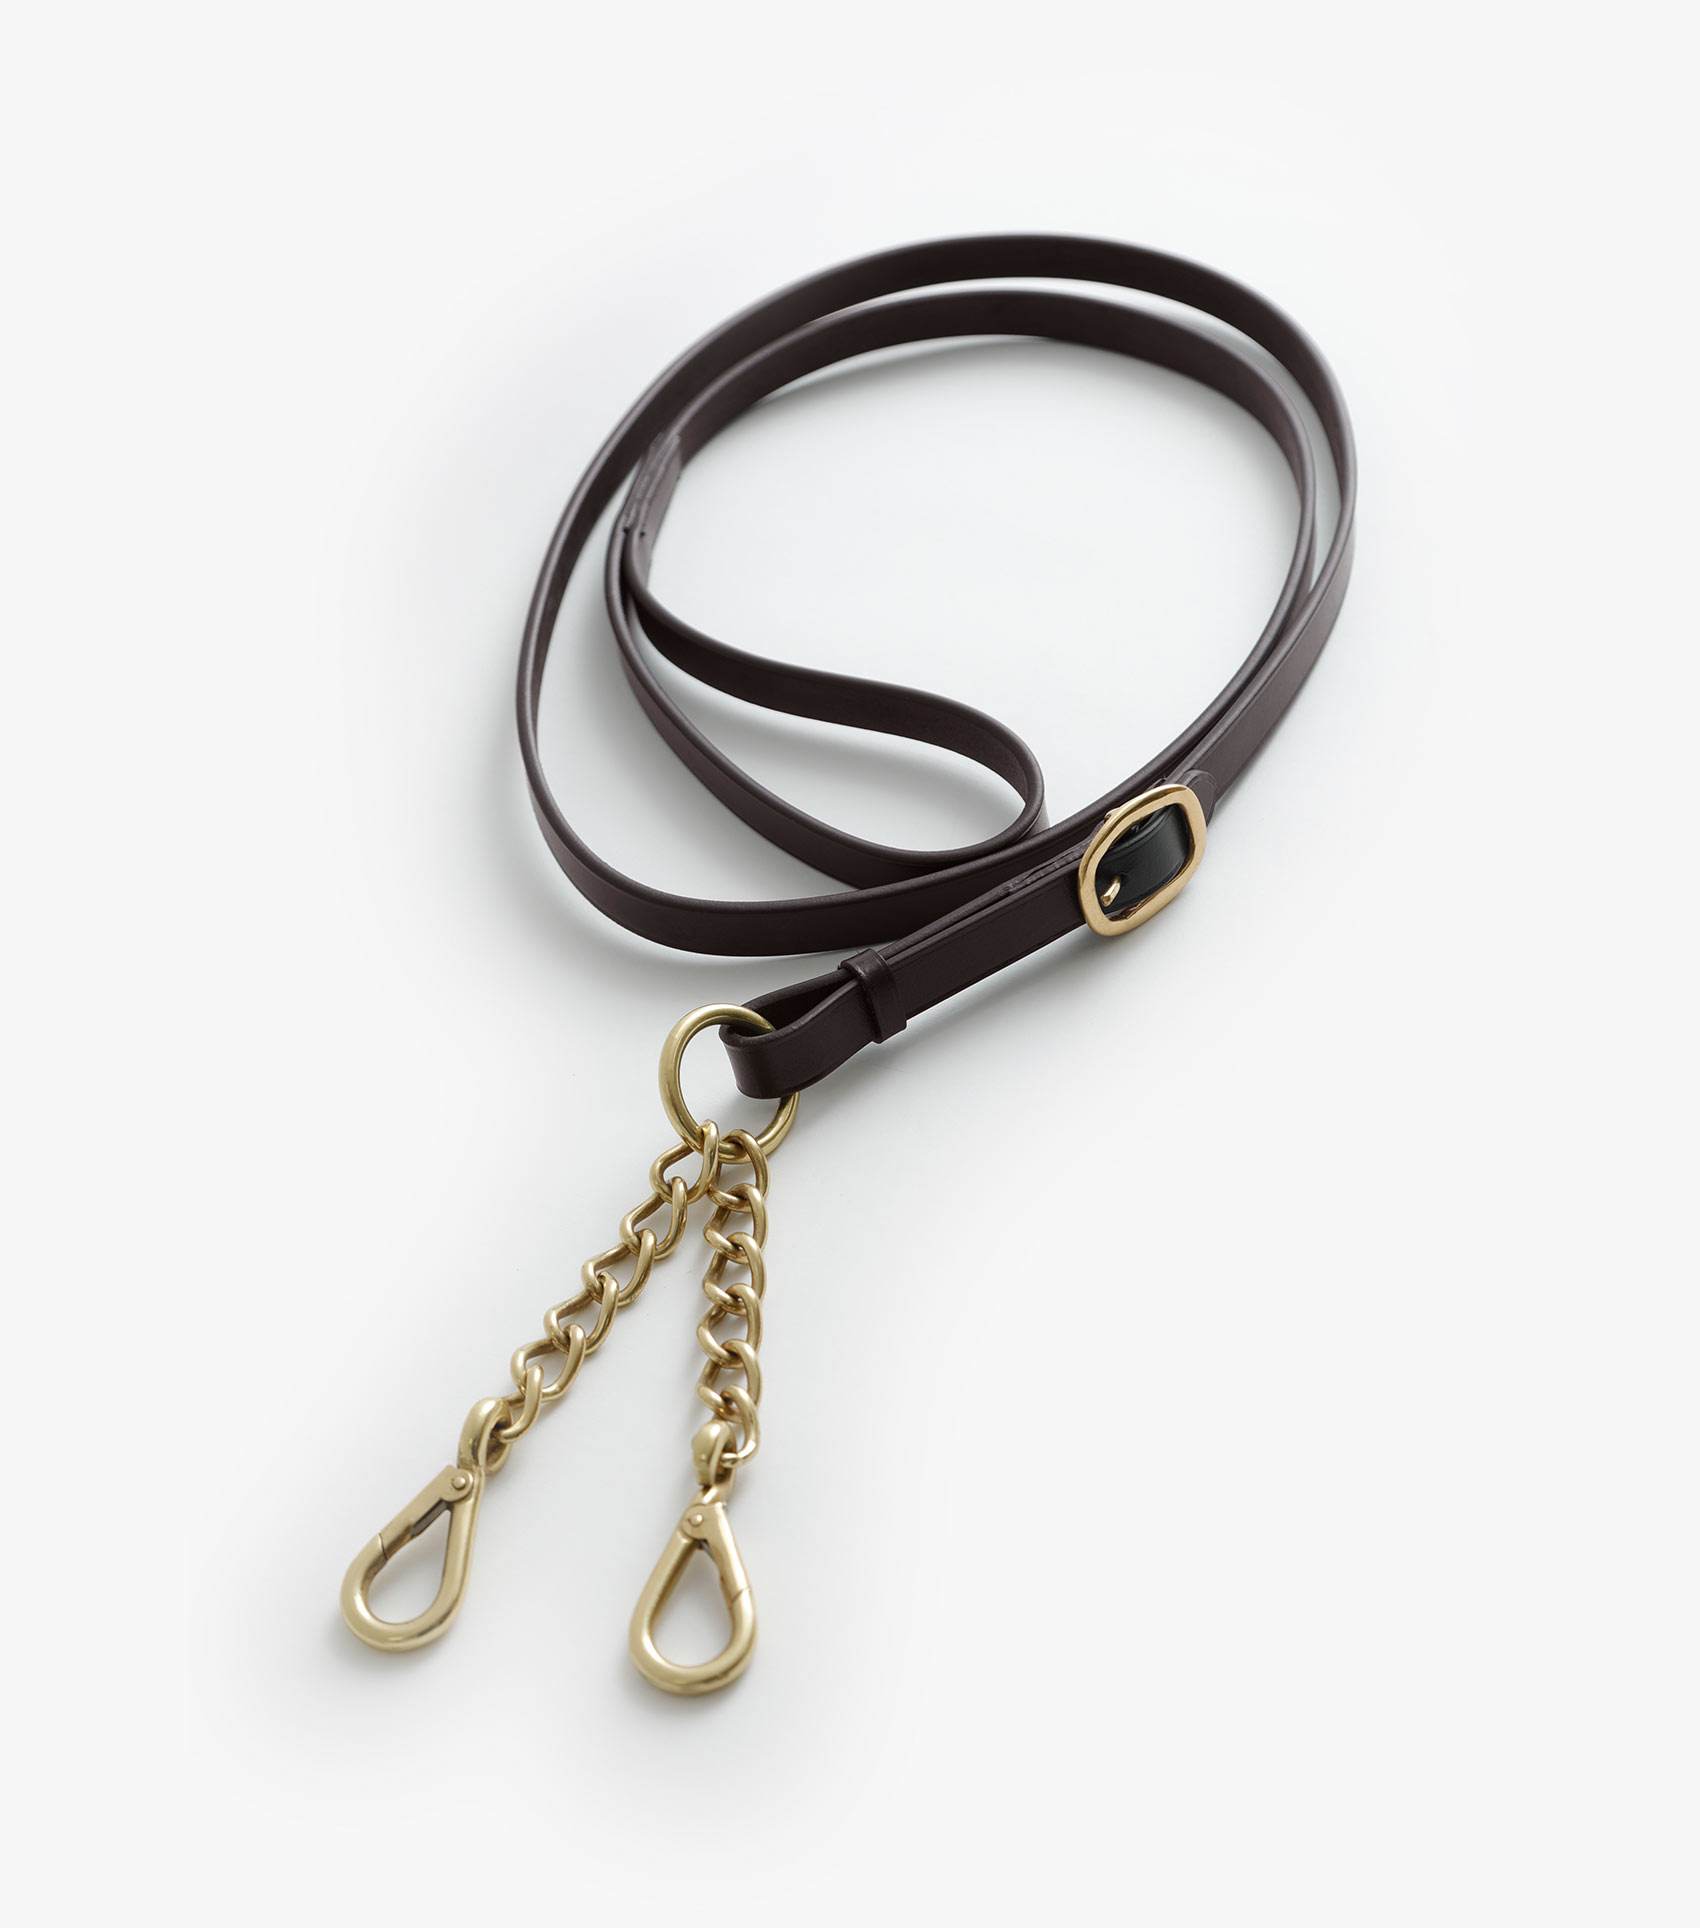 Premier Equine Leather Lead Rein with Chain Coupling